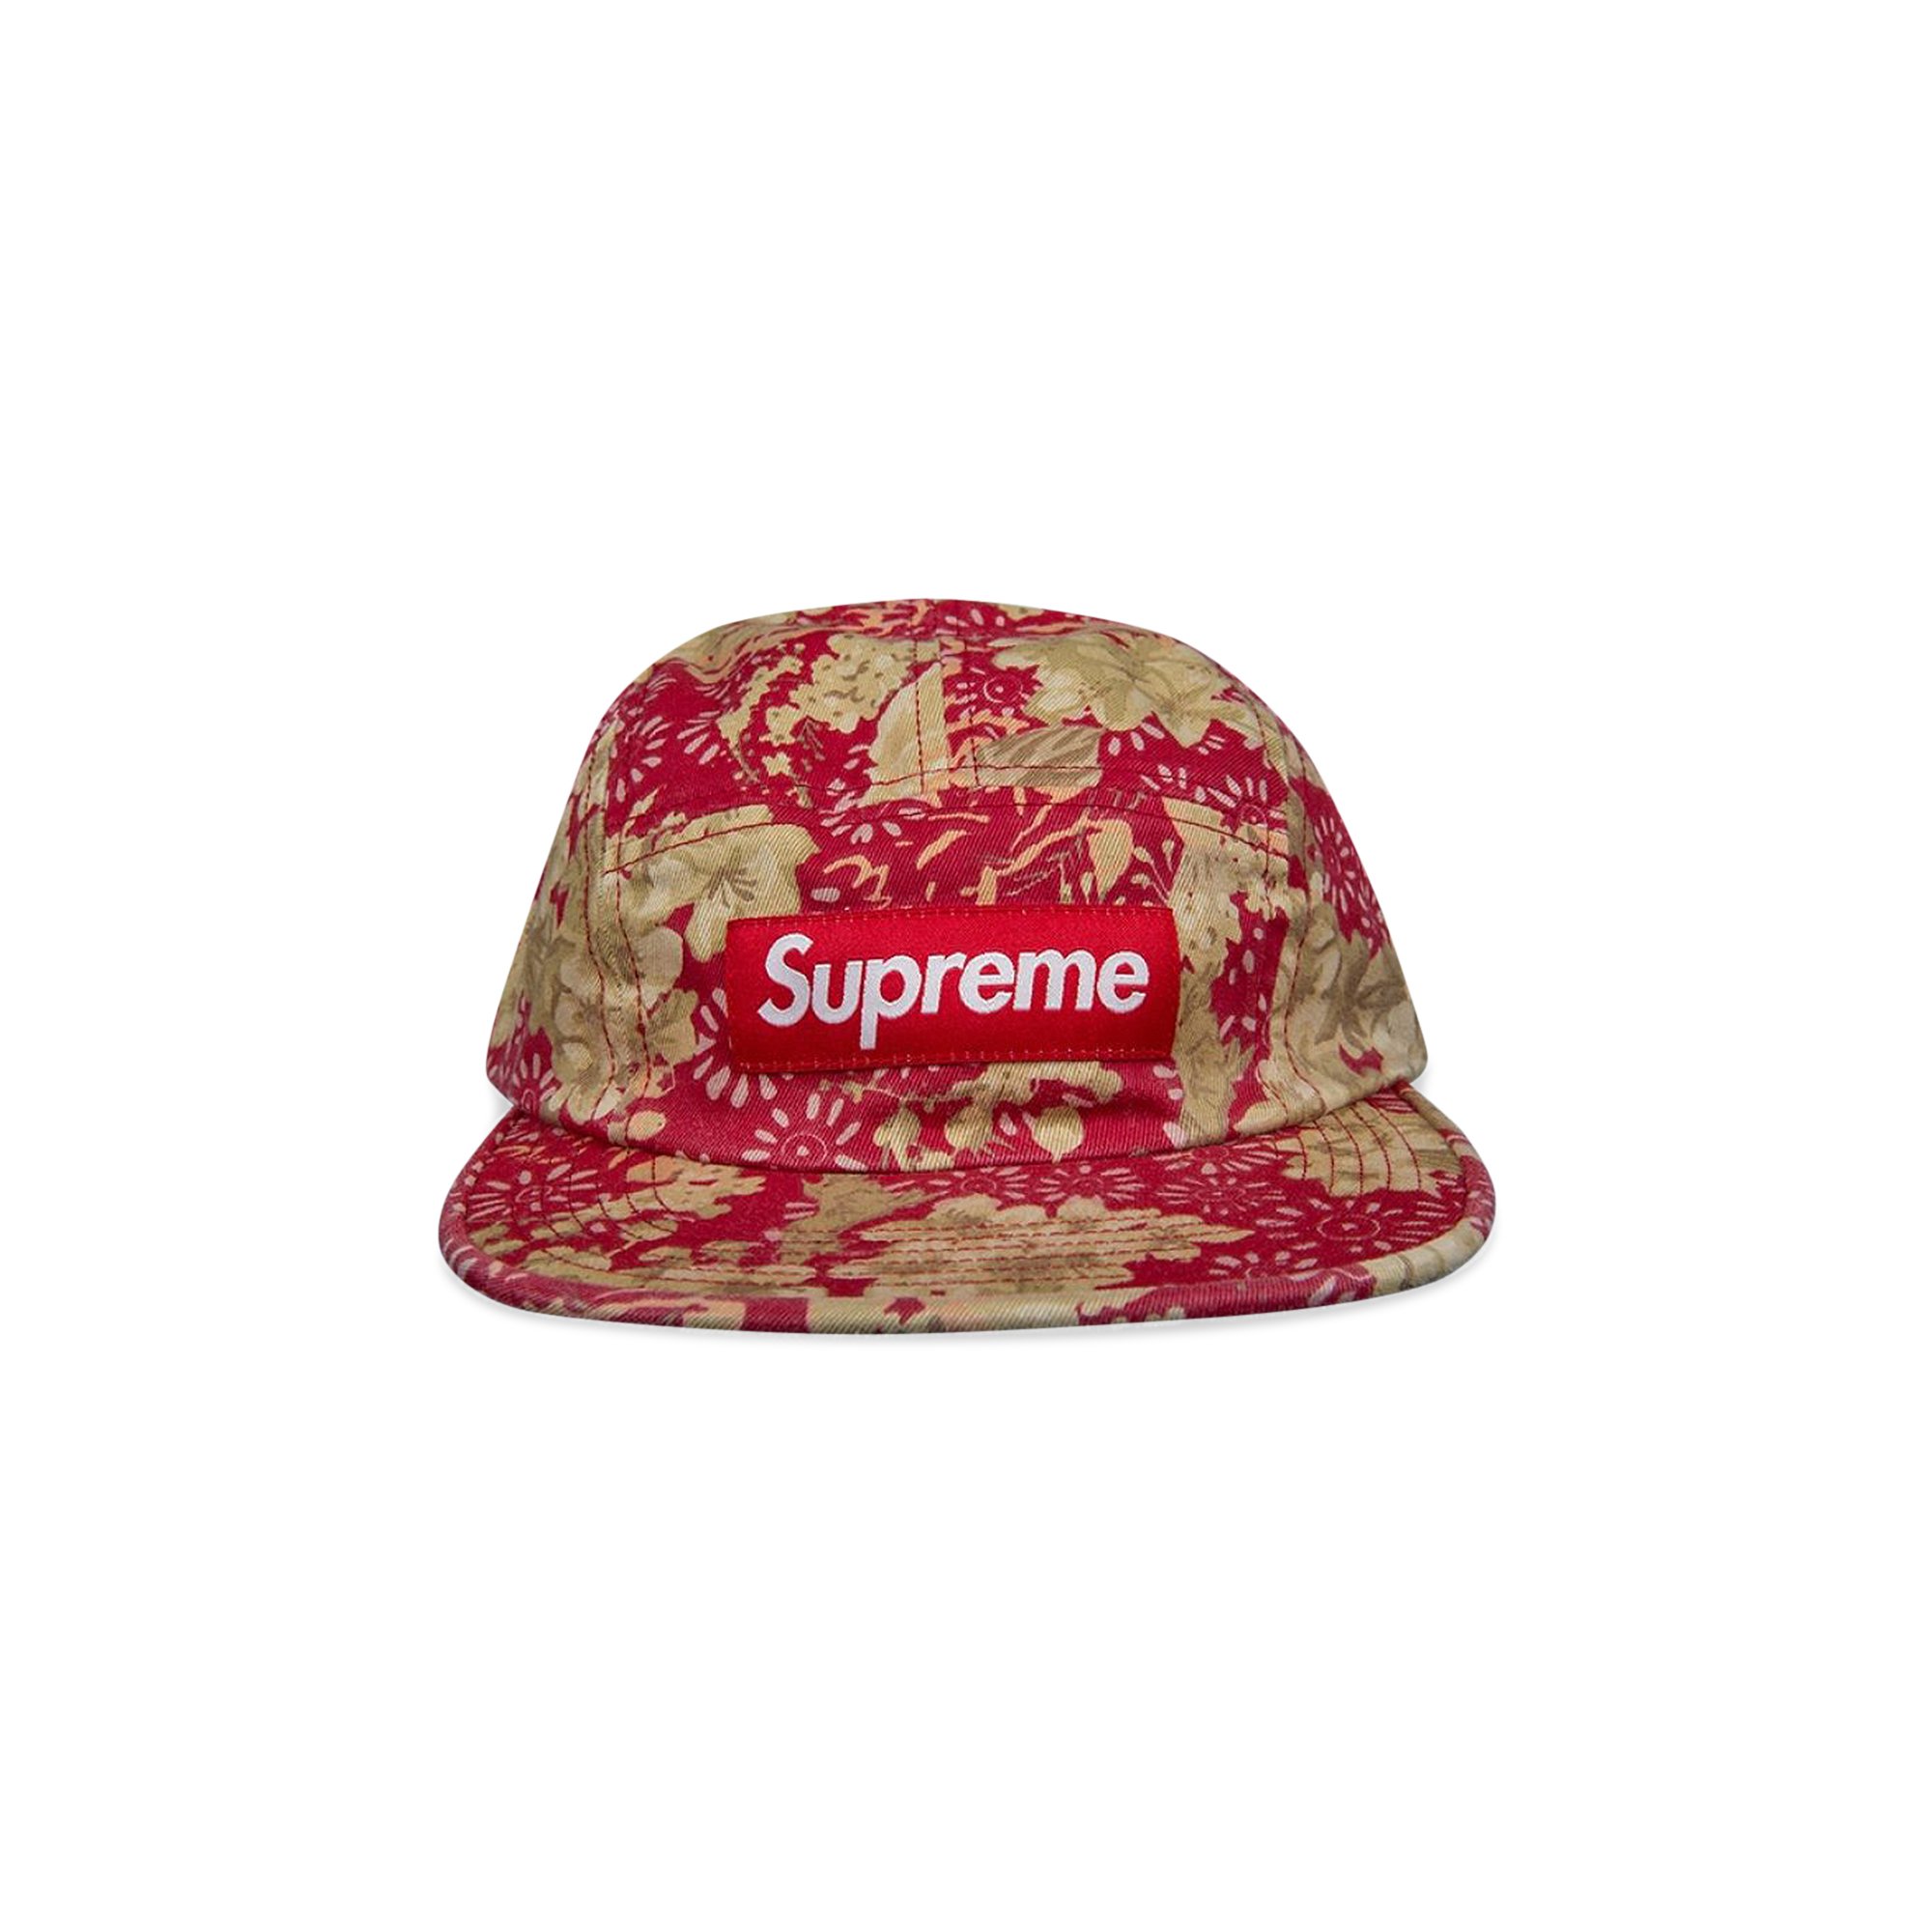 Buy Supreme Washed Chino Twill Camp Cap 'Floral' - SS18H75 FLORAL 